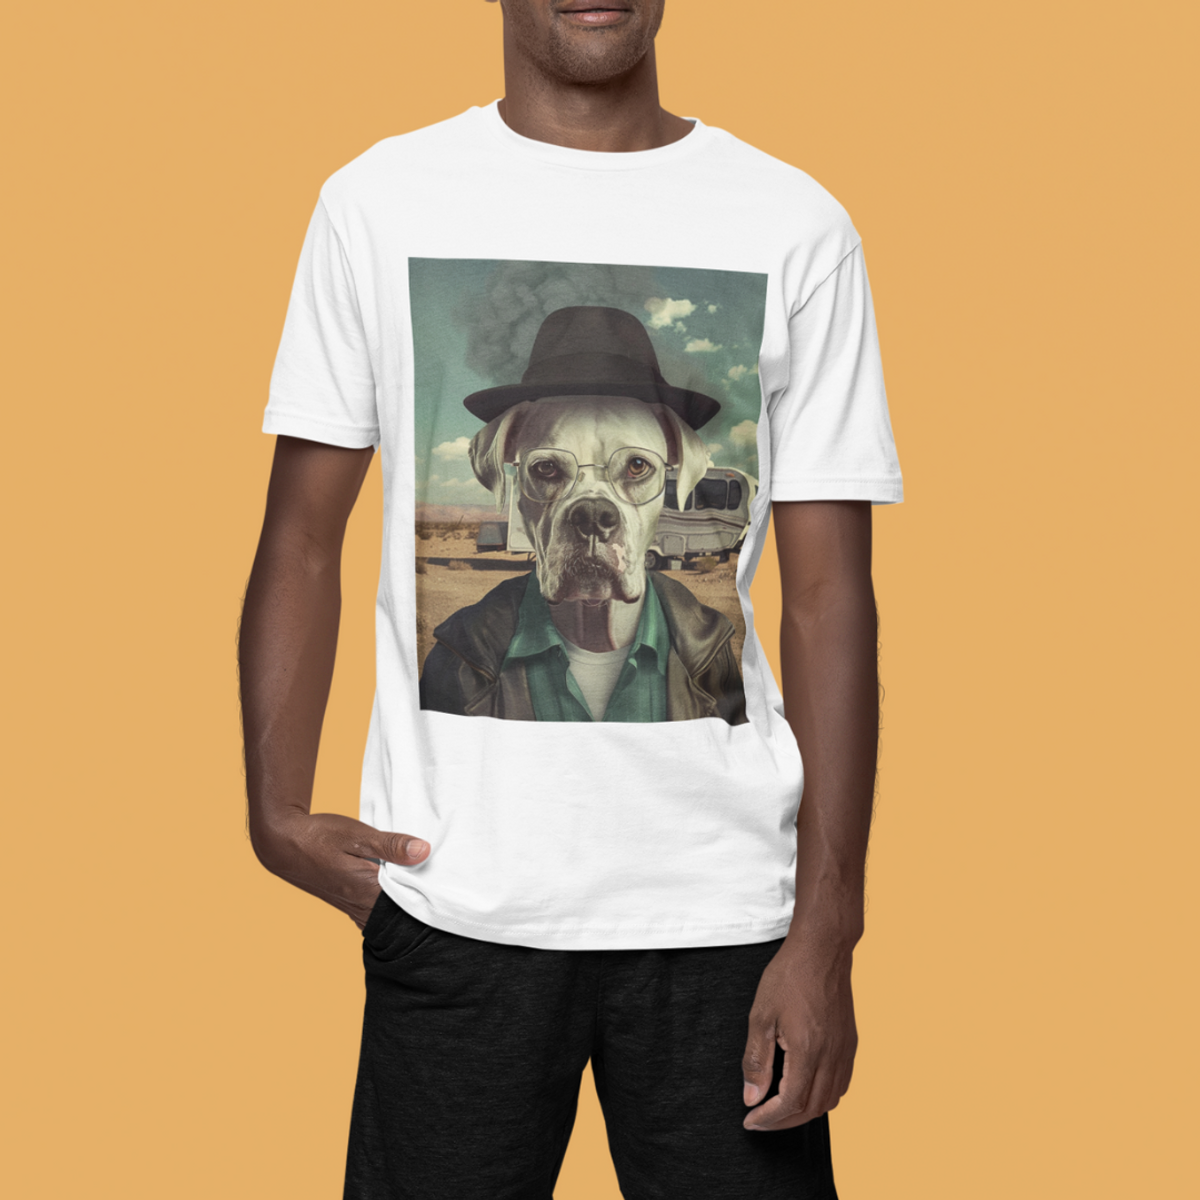 Nome do produto: The One Who Barks - Breaking Bad